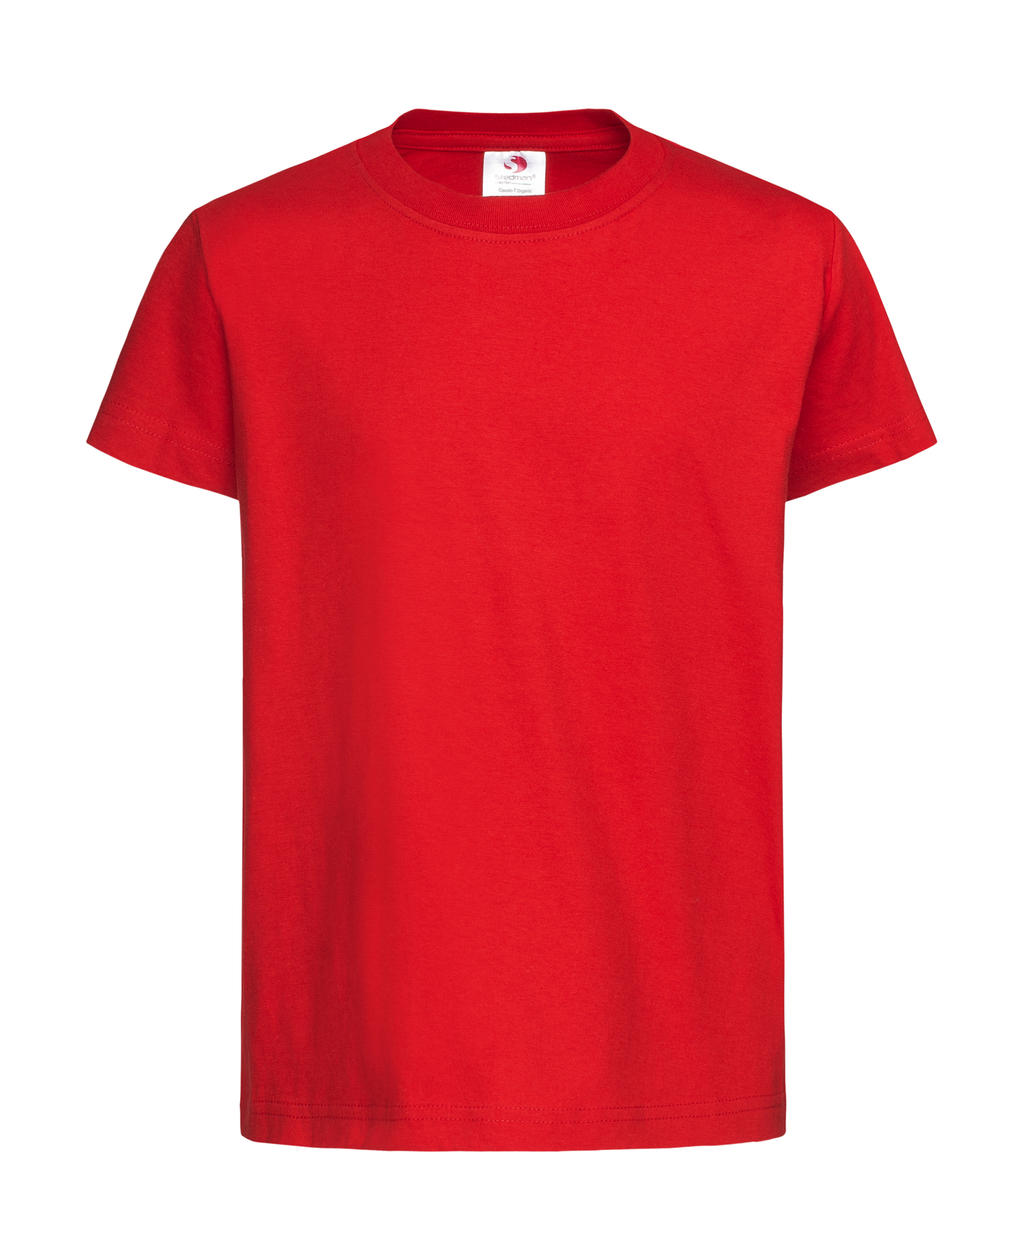 Classic-T Organic Kids - scarlet red